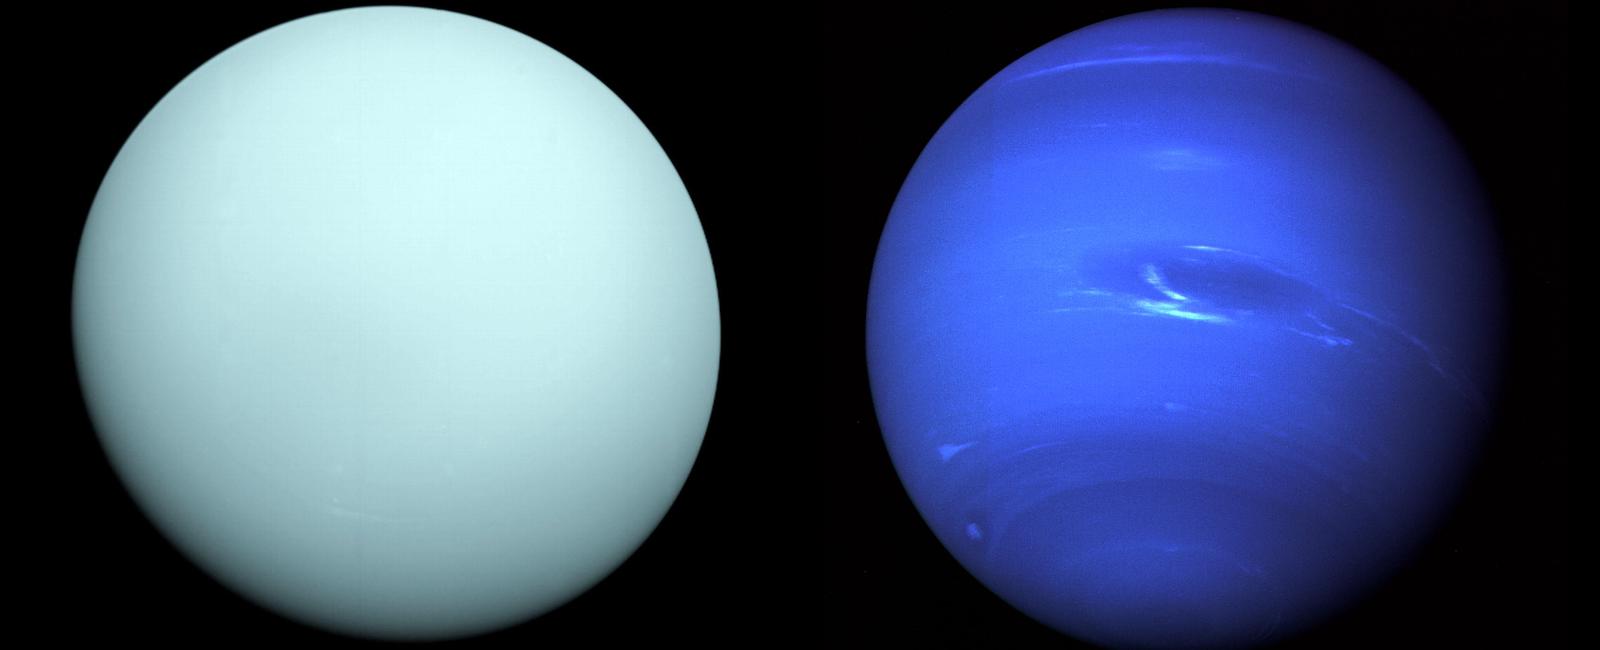 Uranus and neptune are often called planetary twins as their mass composition and rotation are so similar